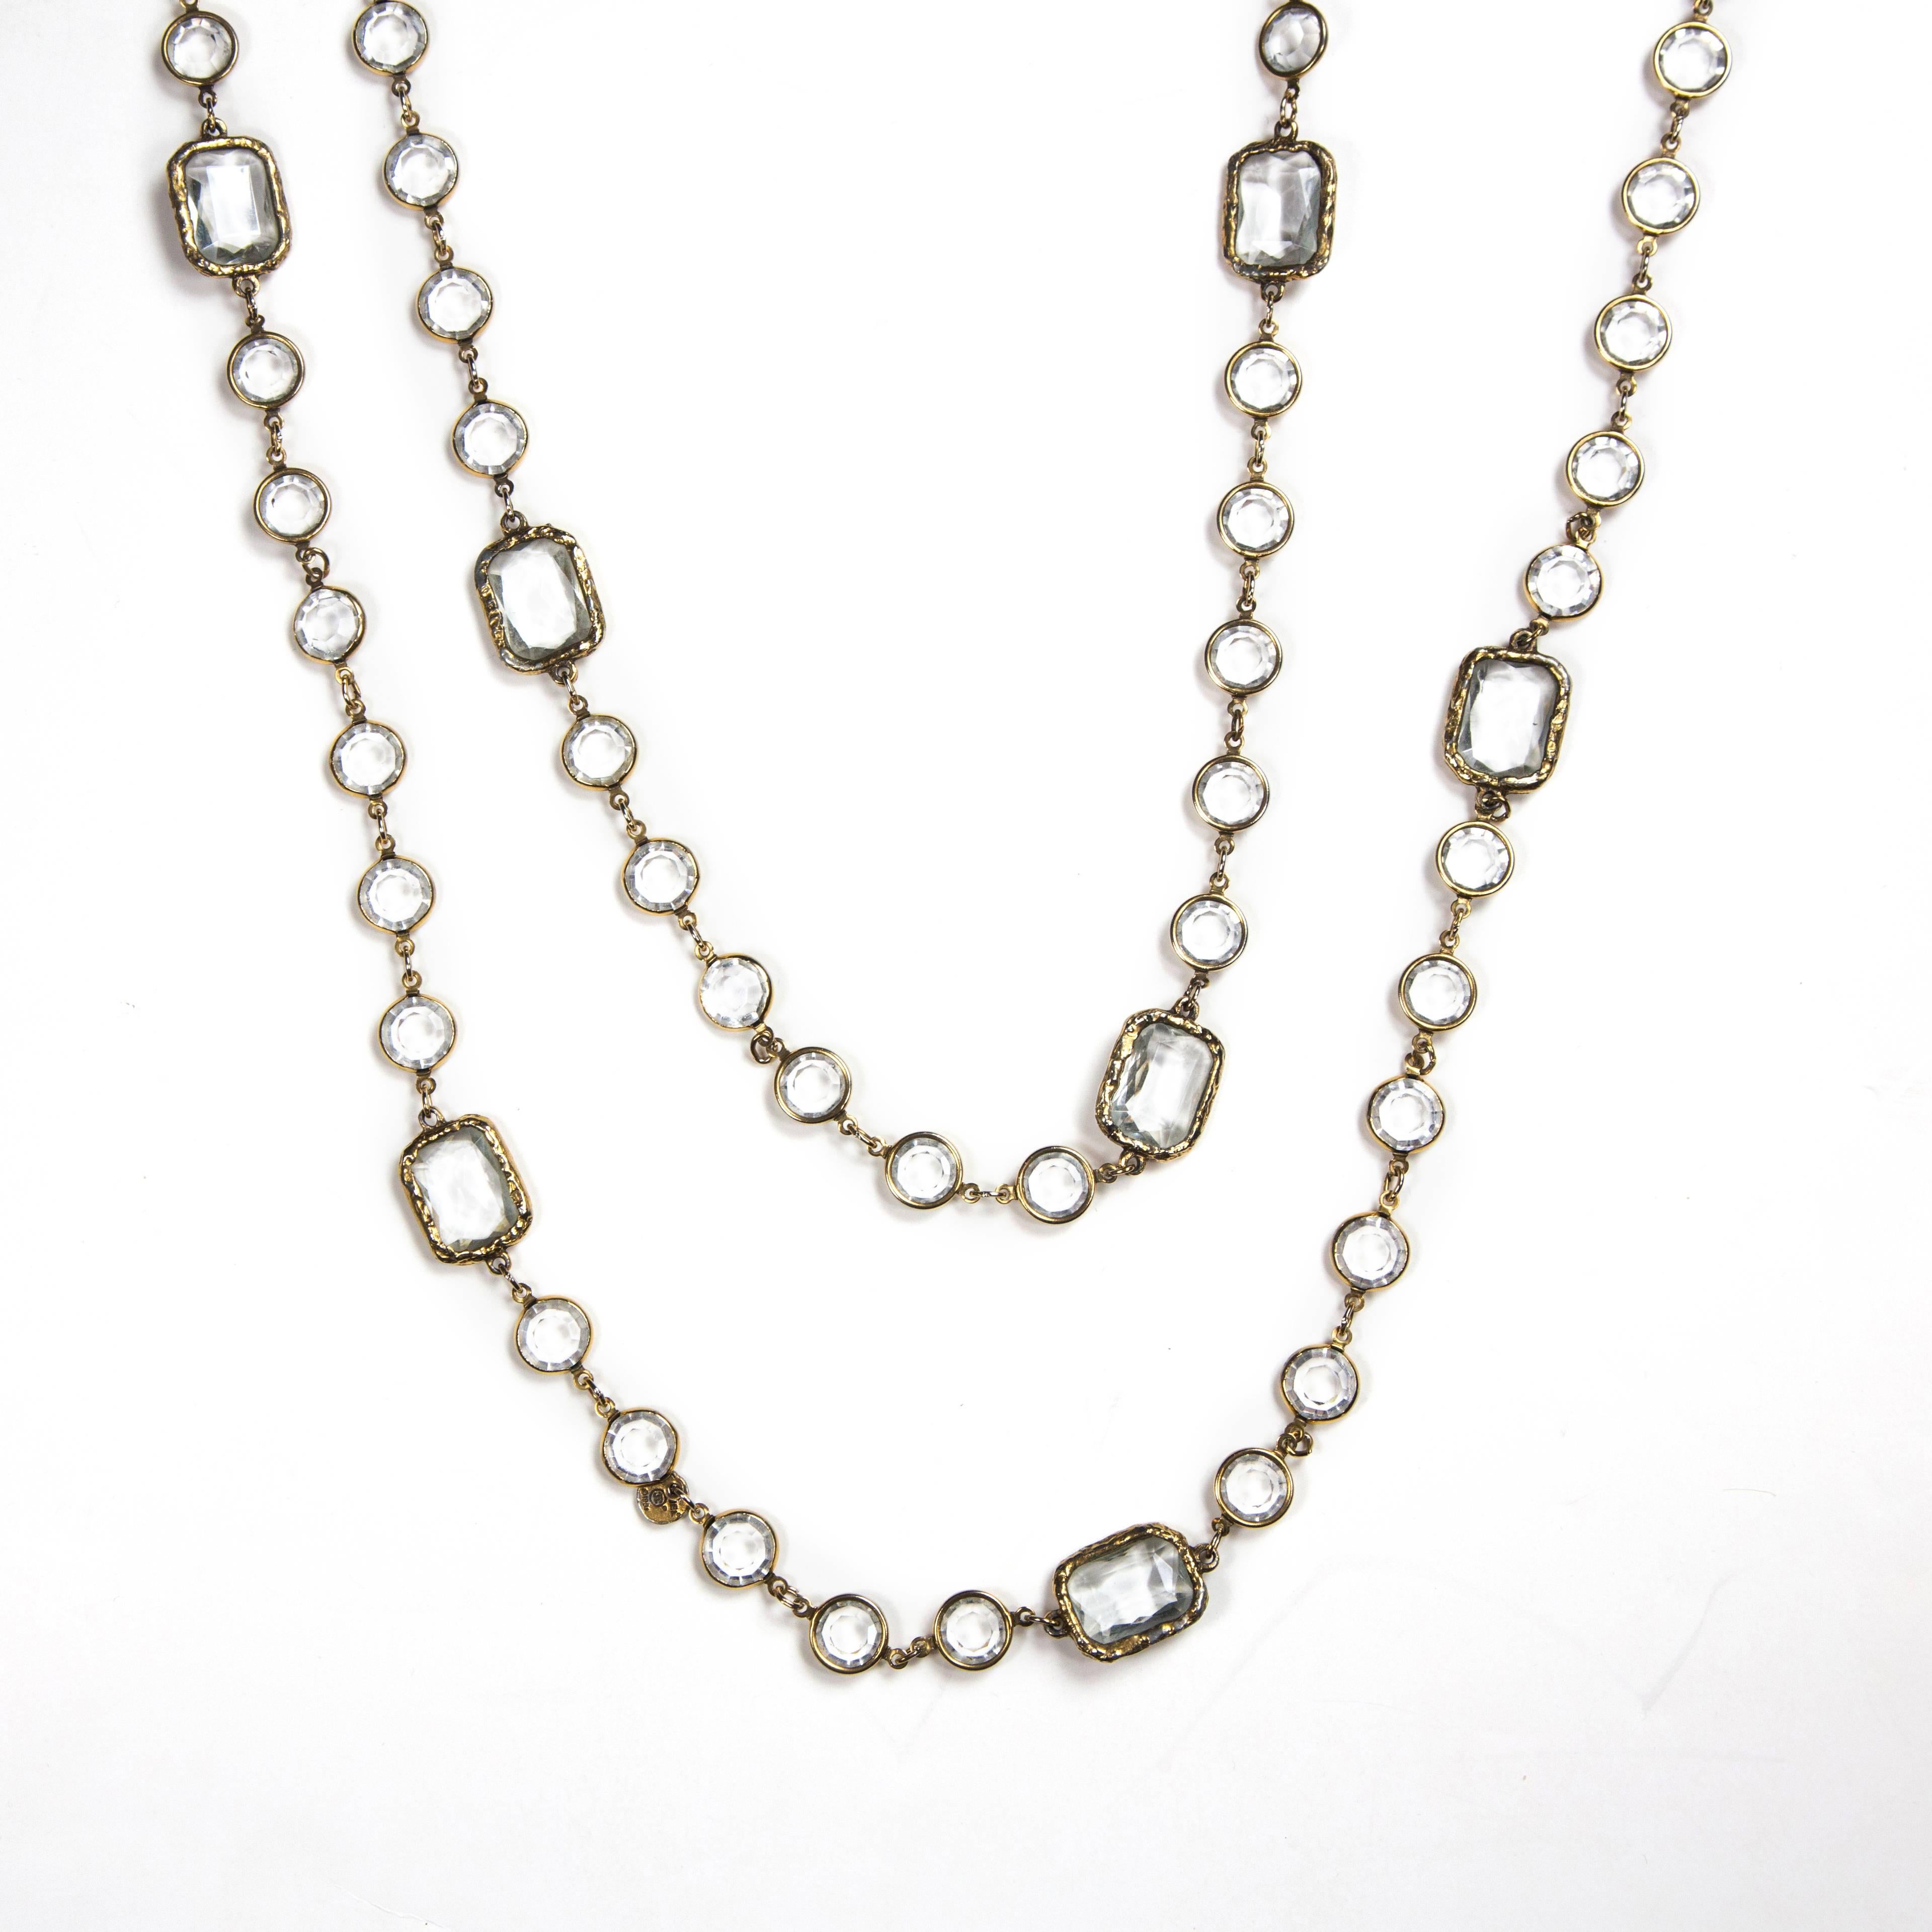 Chanel Chicklet Necklace - 64